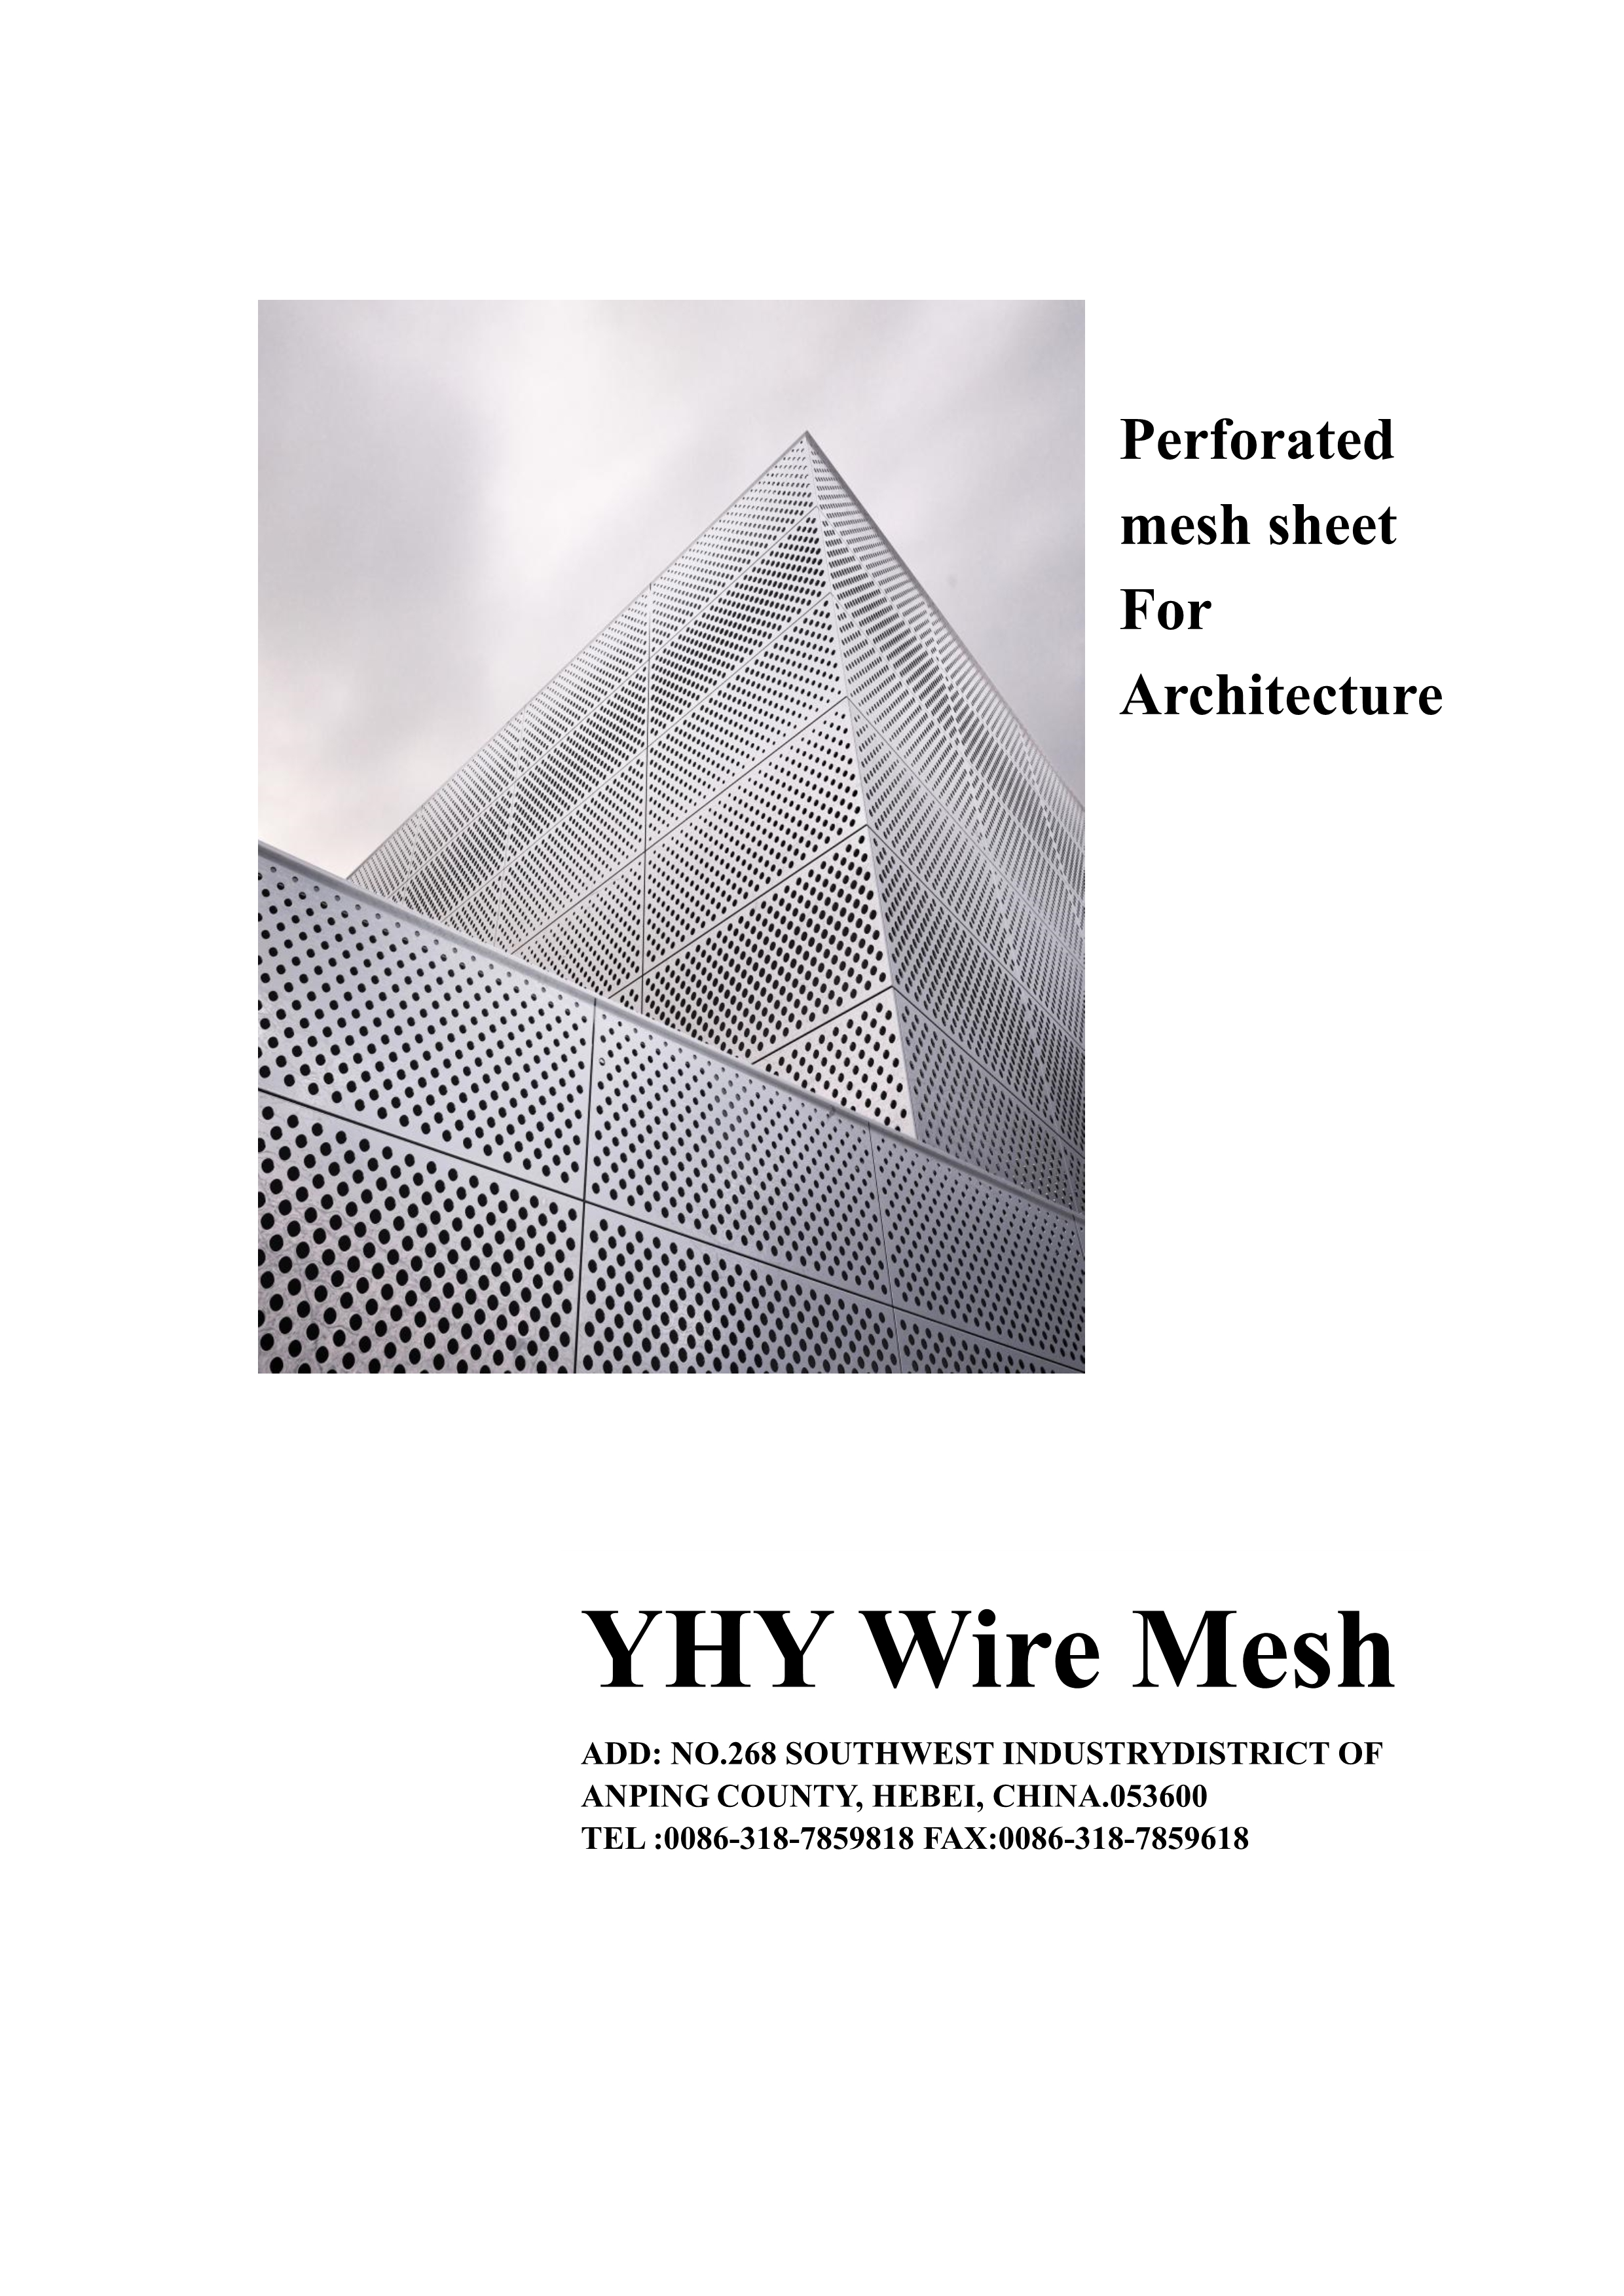 Architectural decorative perforated wire mesh